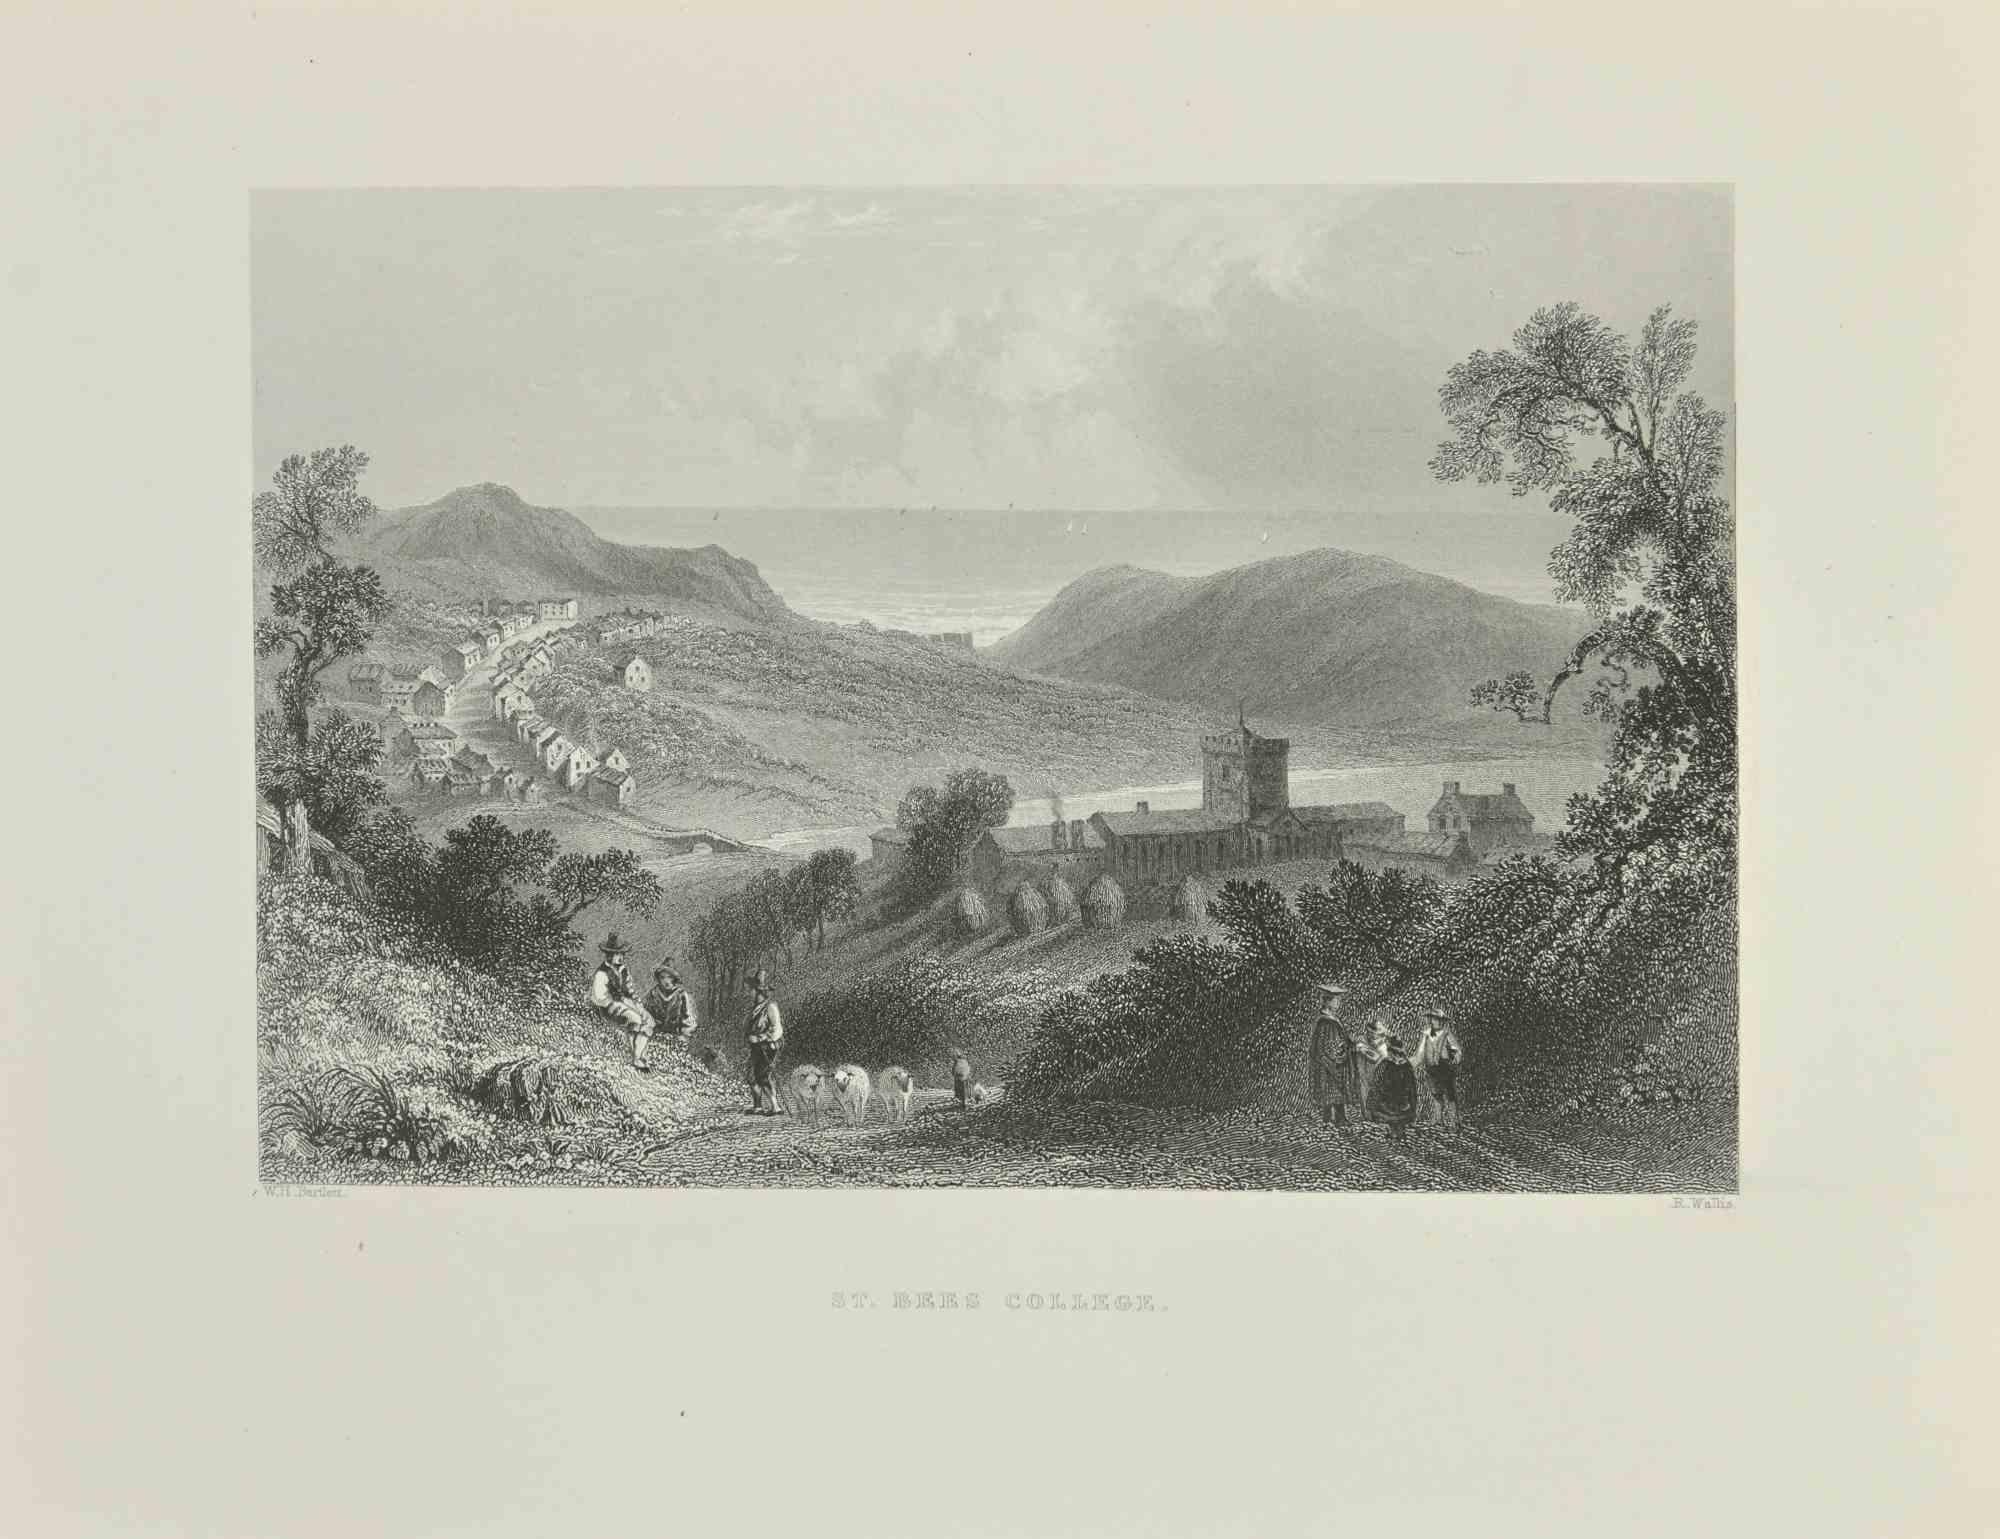 St.Bees College is an etching realized in 1845 by R. Wallis.

Signed in plate.

The artwork is realized in a well-balanced composition.